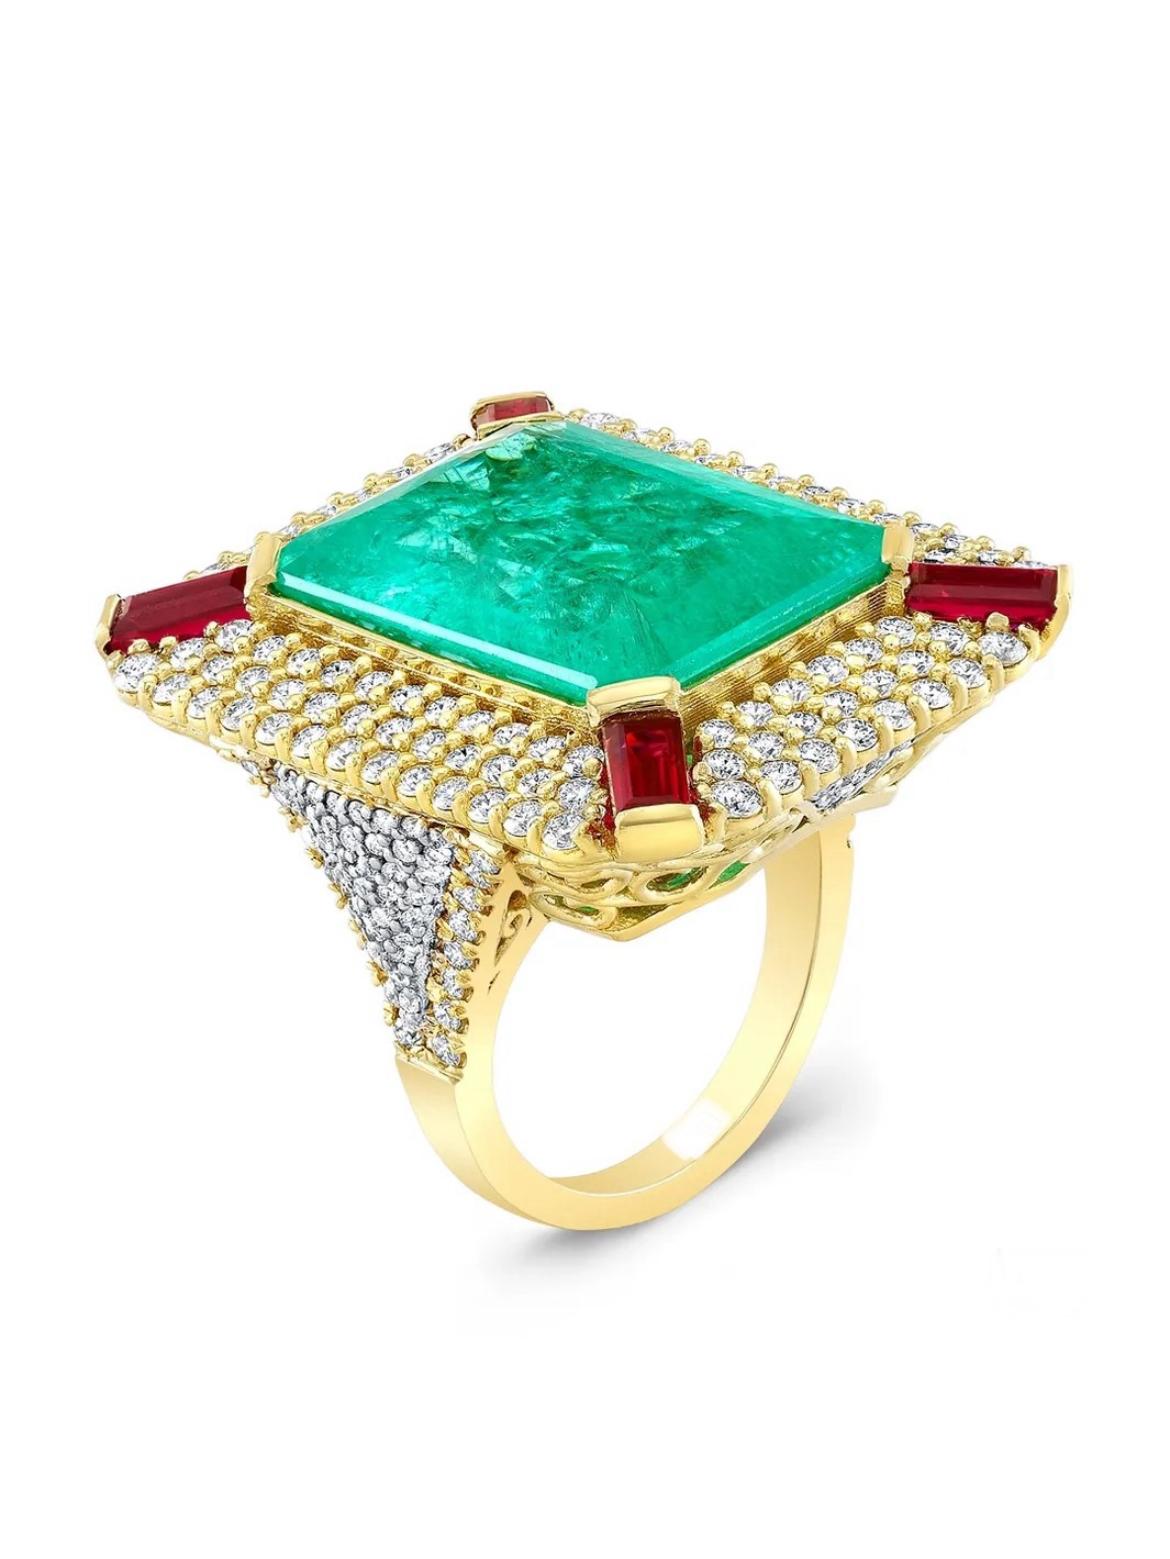 A monumental 23.06-carat untreated Paraiba-type Tourmaline from Mozambique is accompanied by a GIA report. It is framed within four Burmese Rubies weighing 1.89 carats and round diamonds weighing 2.97 carats. 